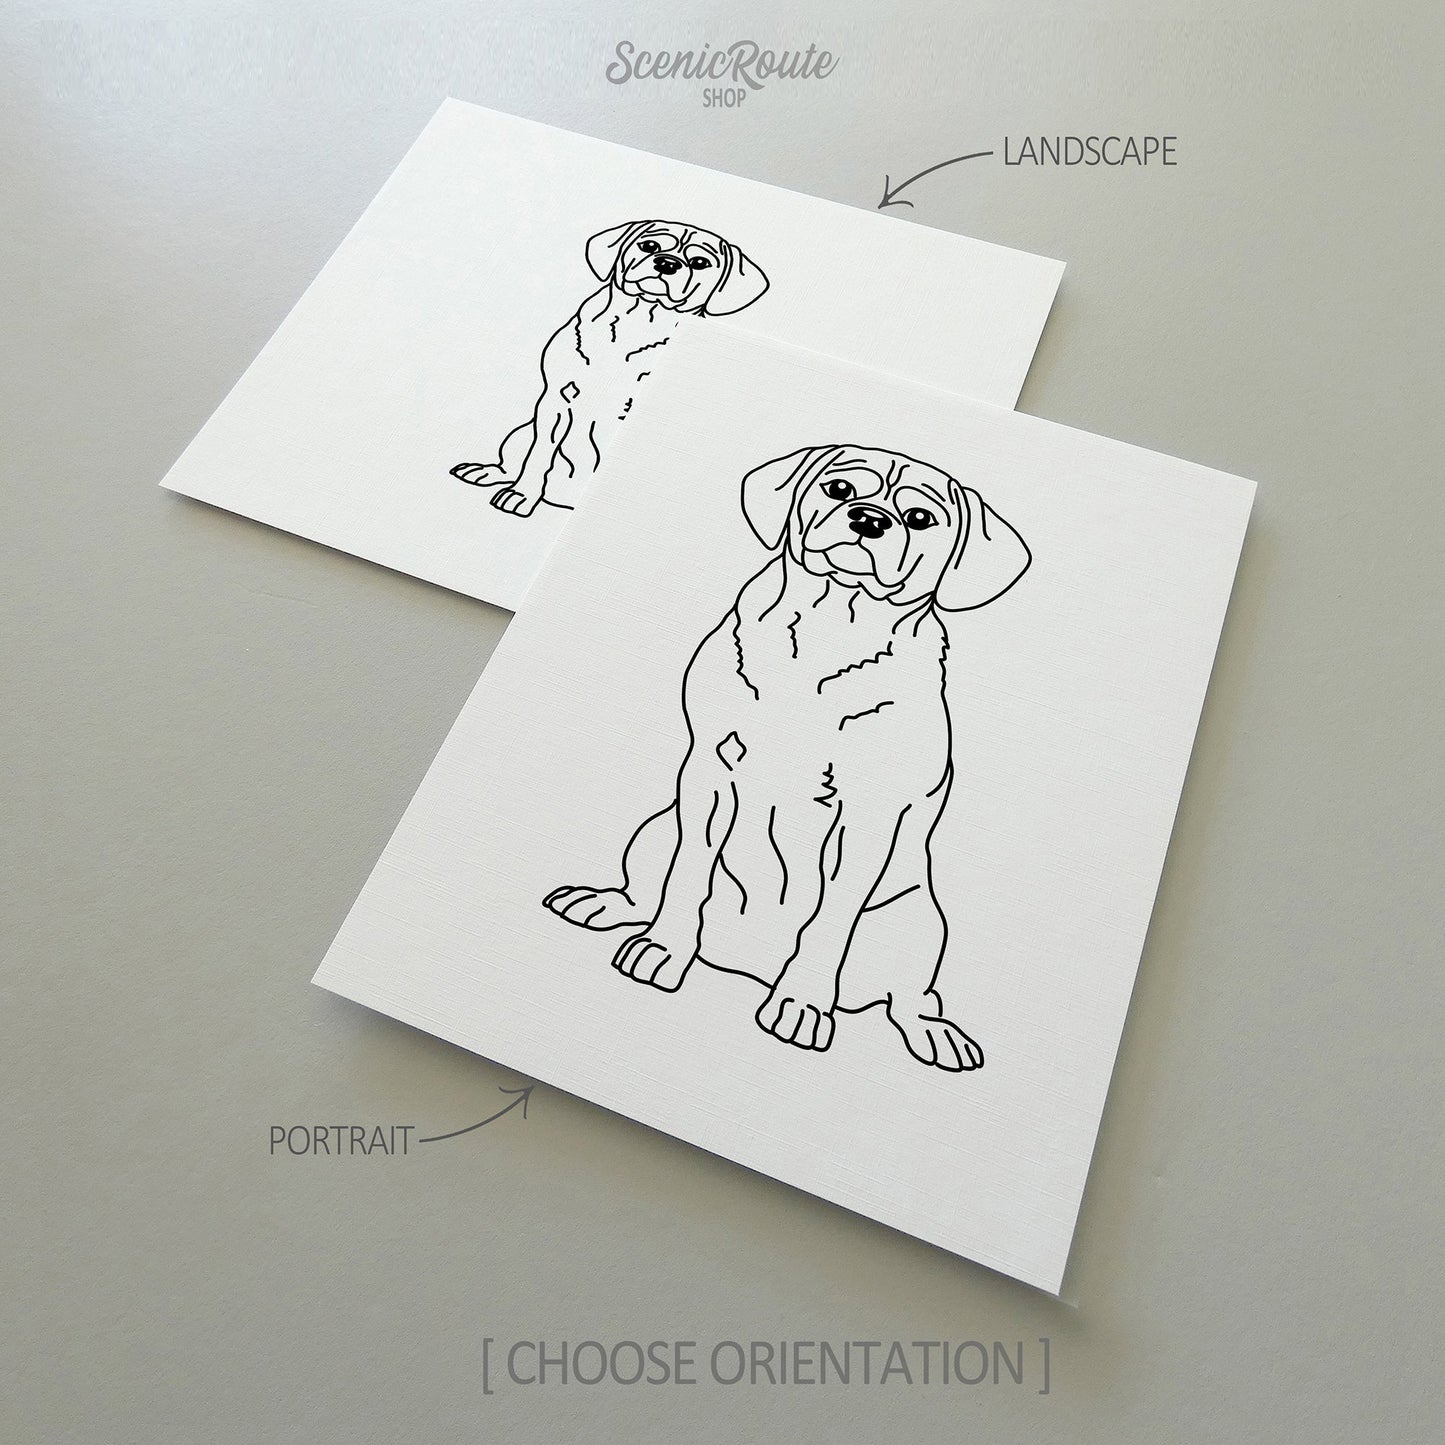 Two line art drawings of a Puggle dog on white linen paper with a gray background.  The pieces are shown in portrait and landscape orientation for the available art print options.